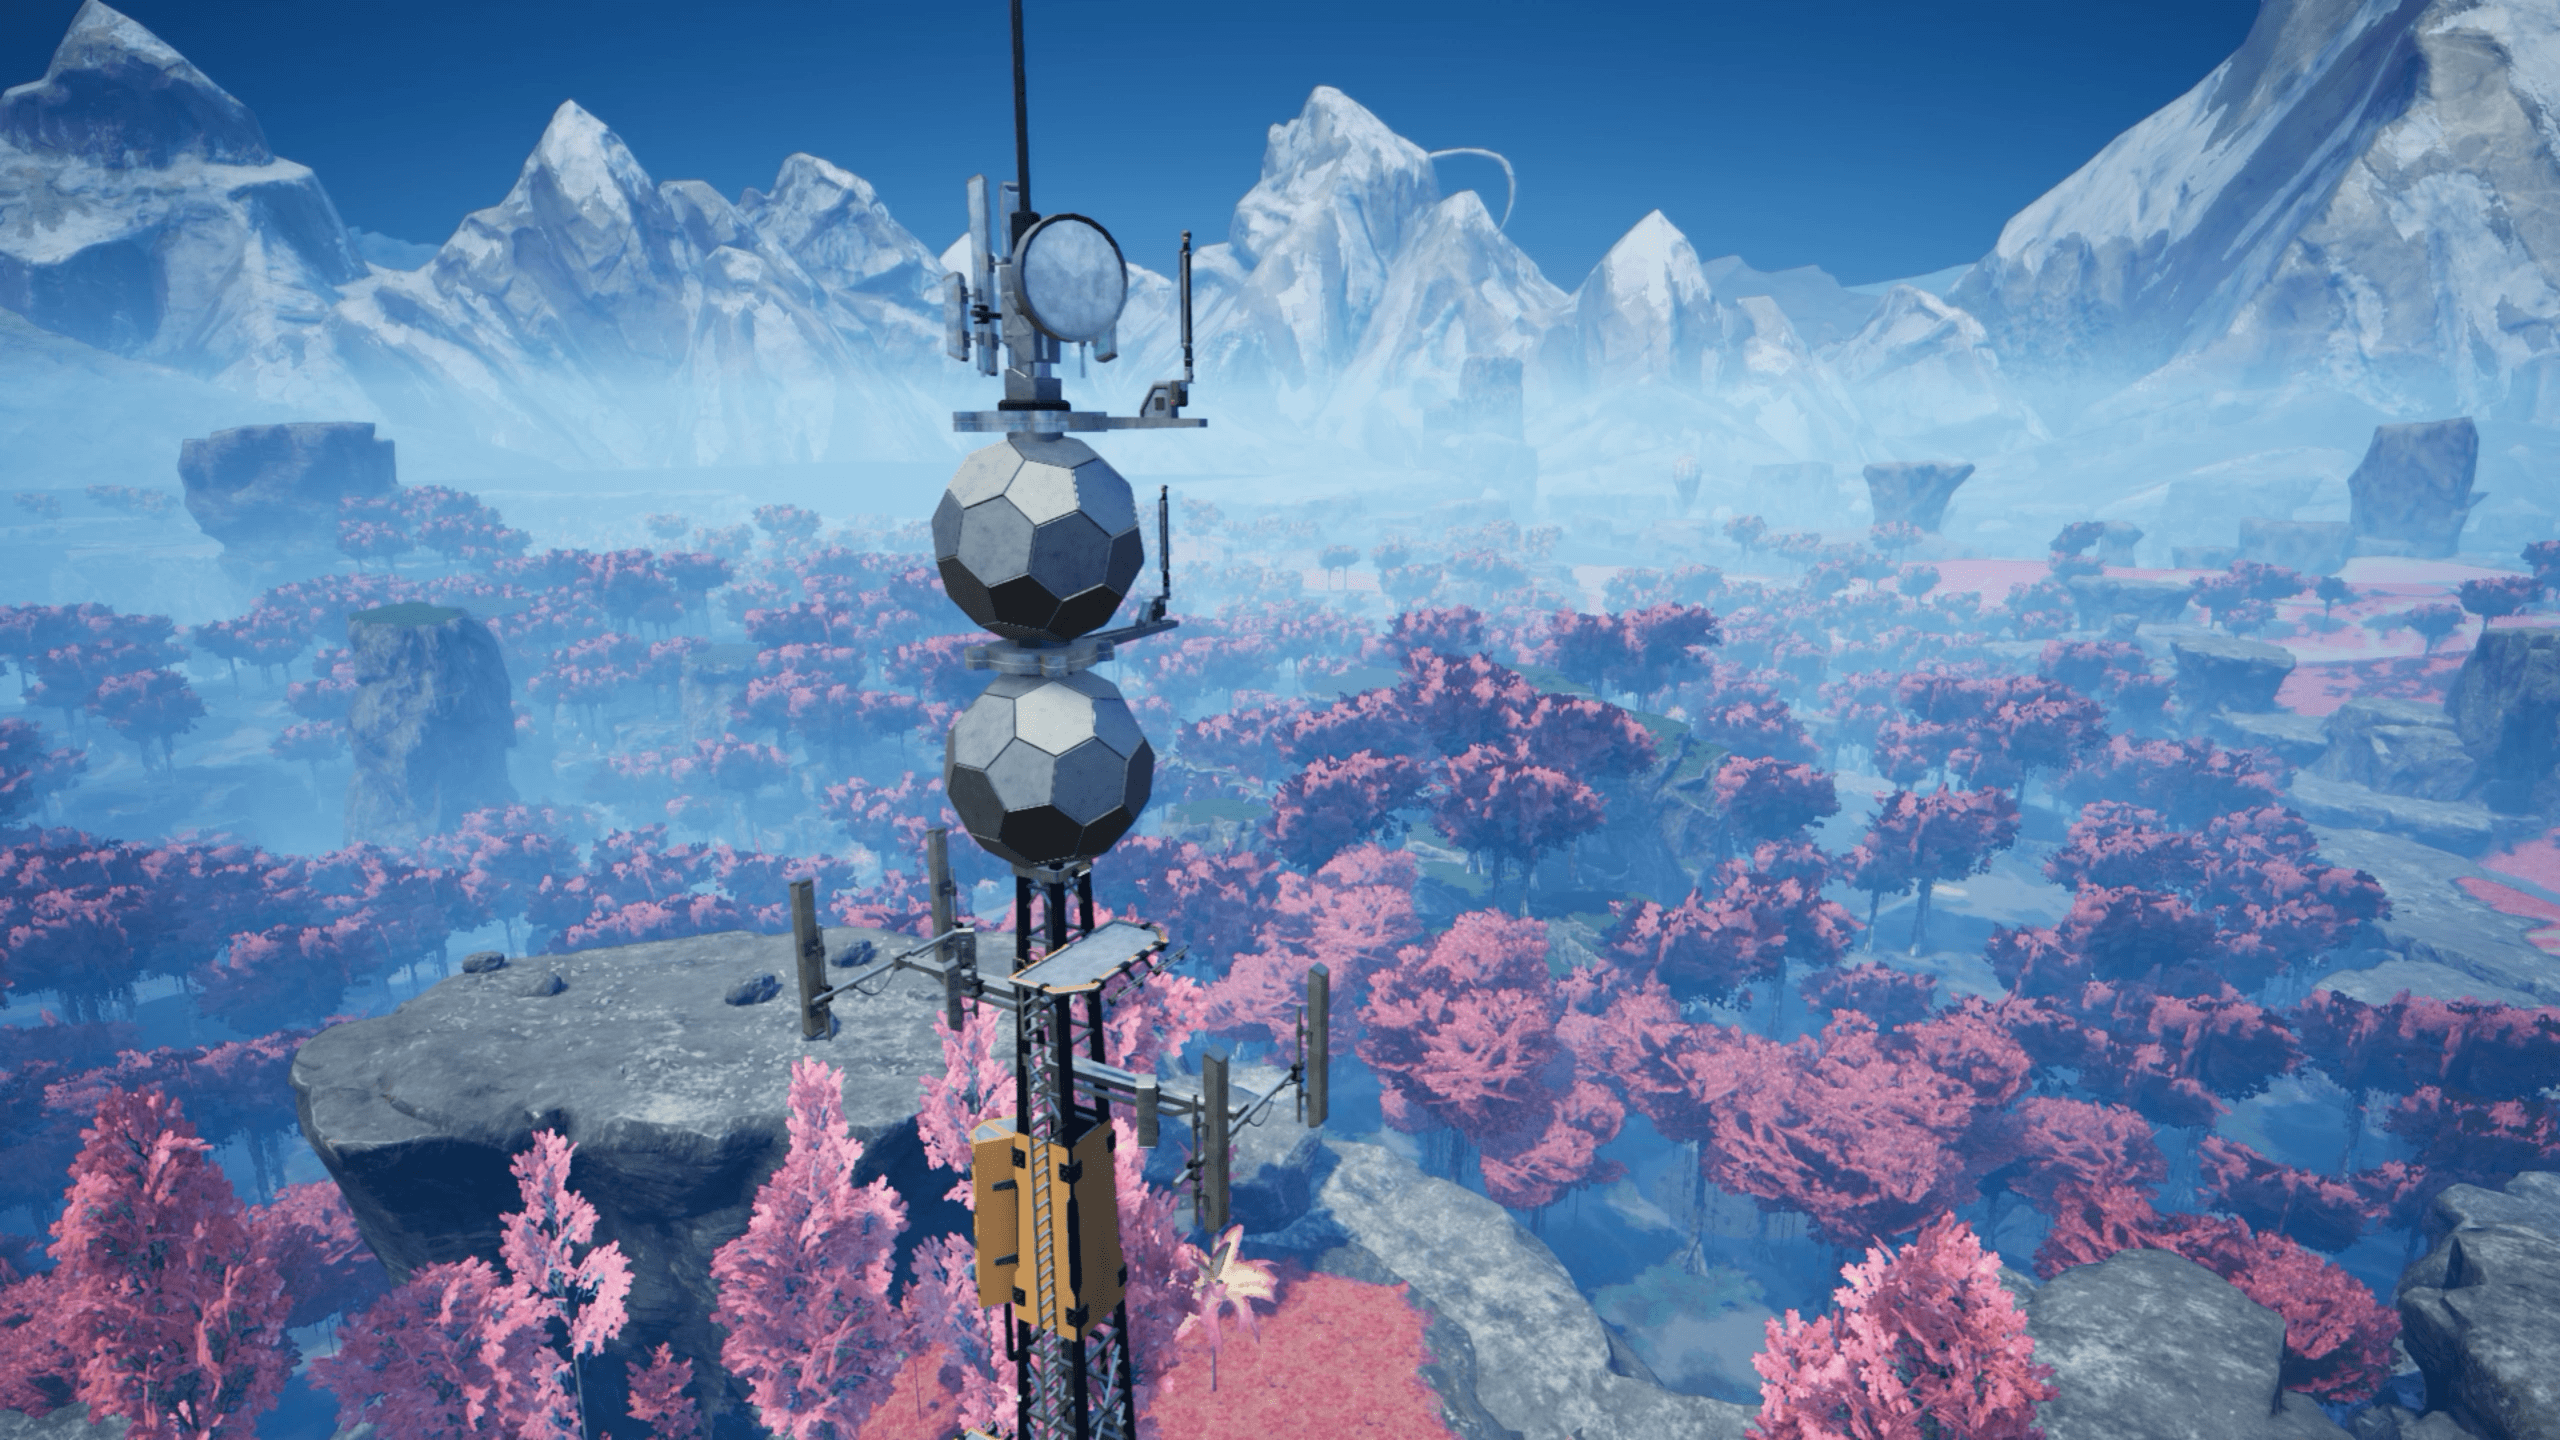 Satisfactory's first major update introduces conveyor lifts